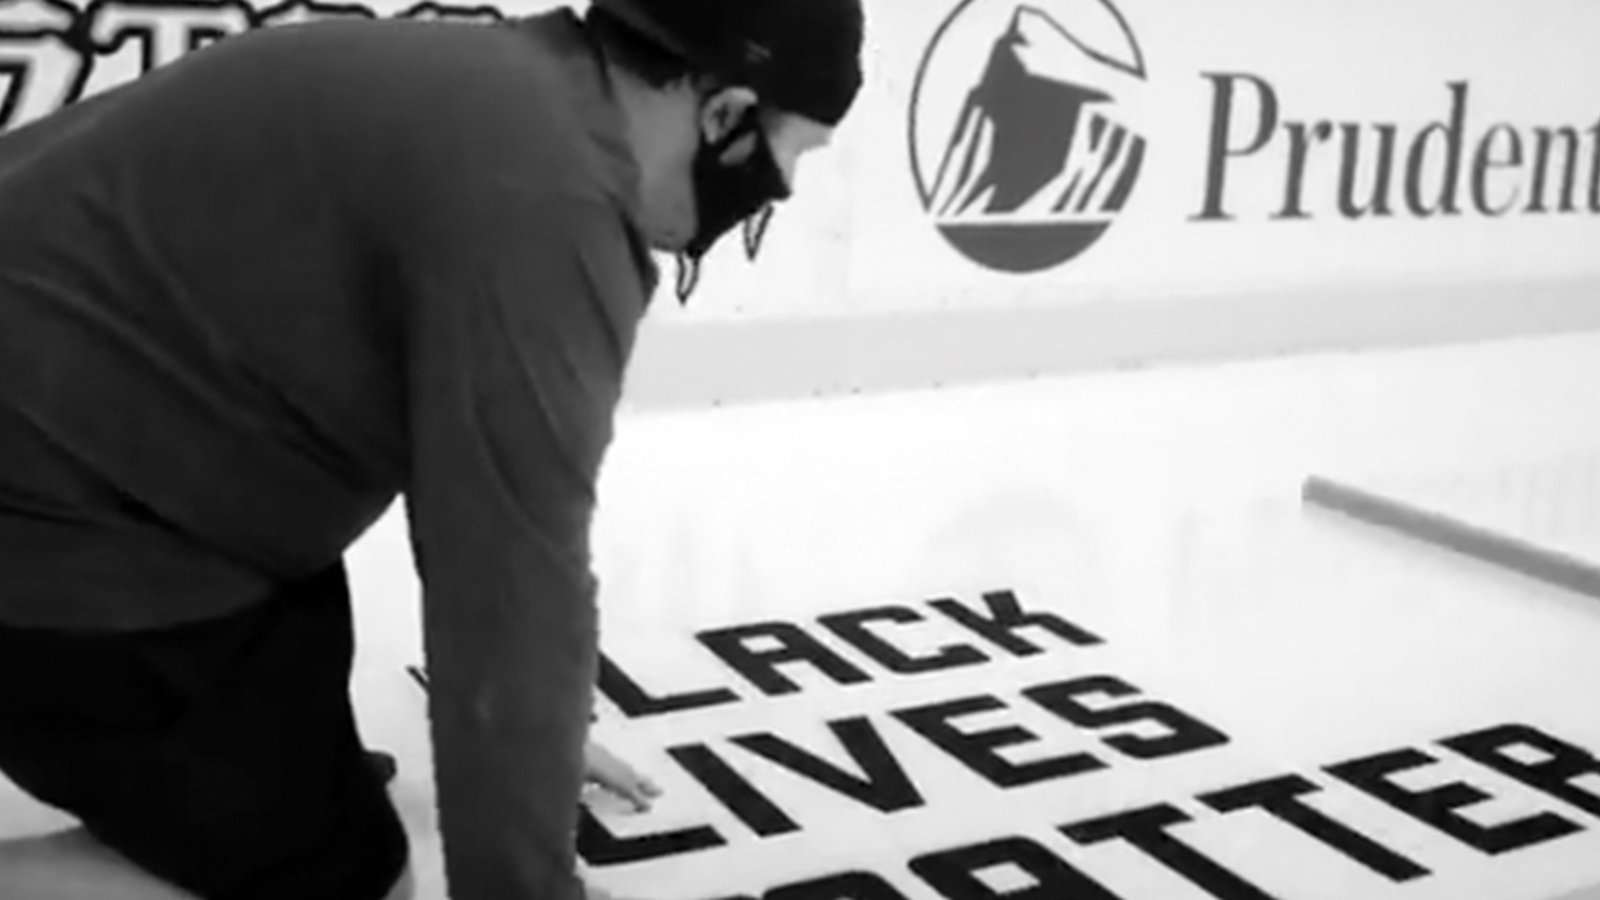 Devils install “Black Lives Matter” on their ice as part of their commitment to racial equality